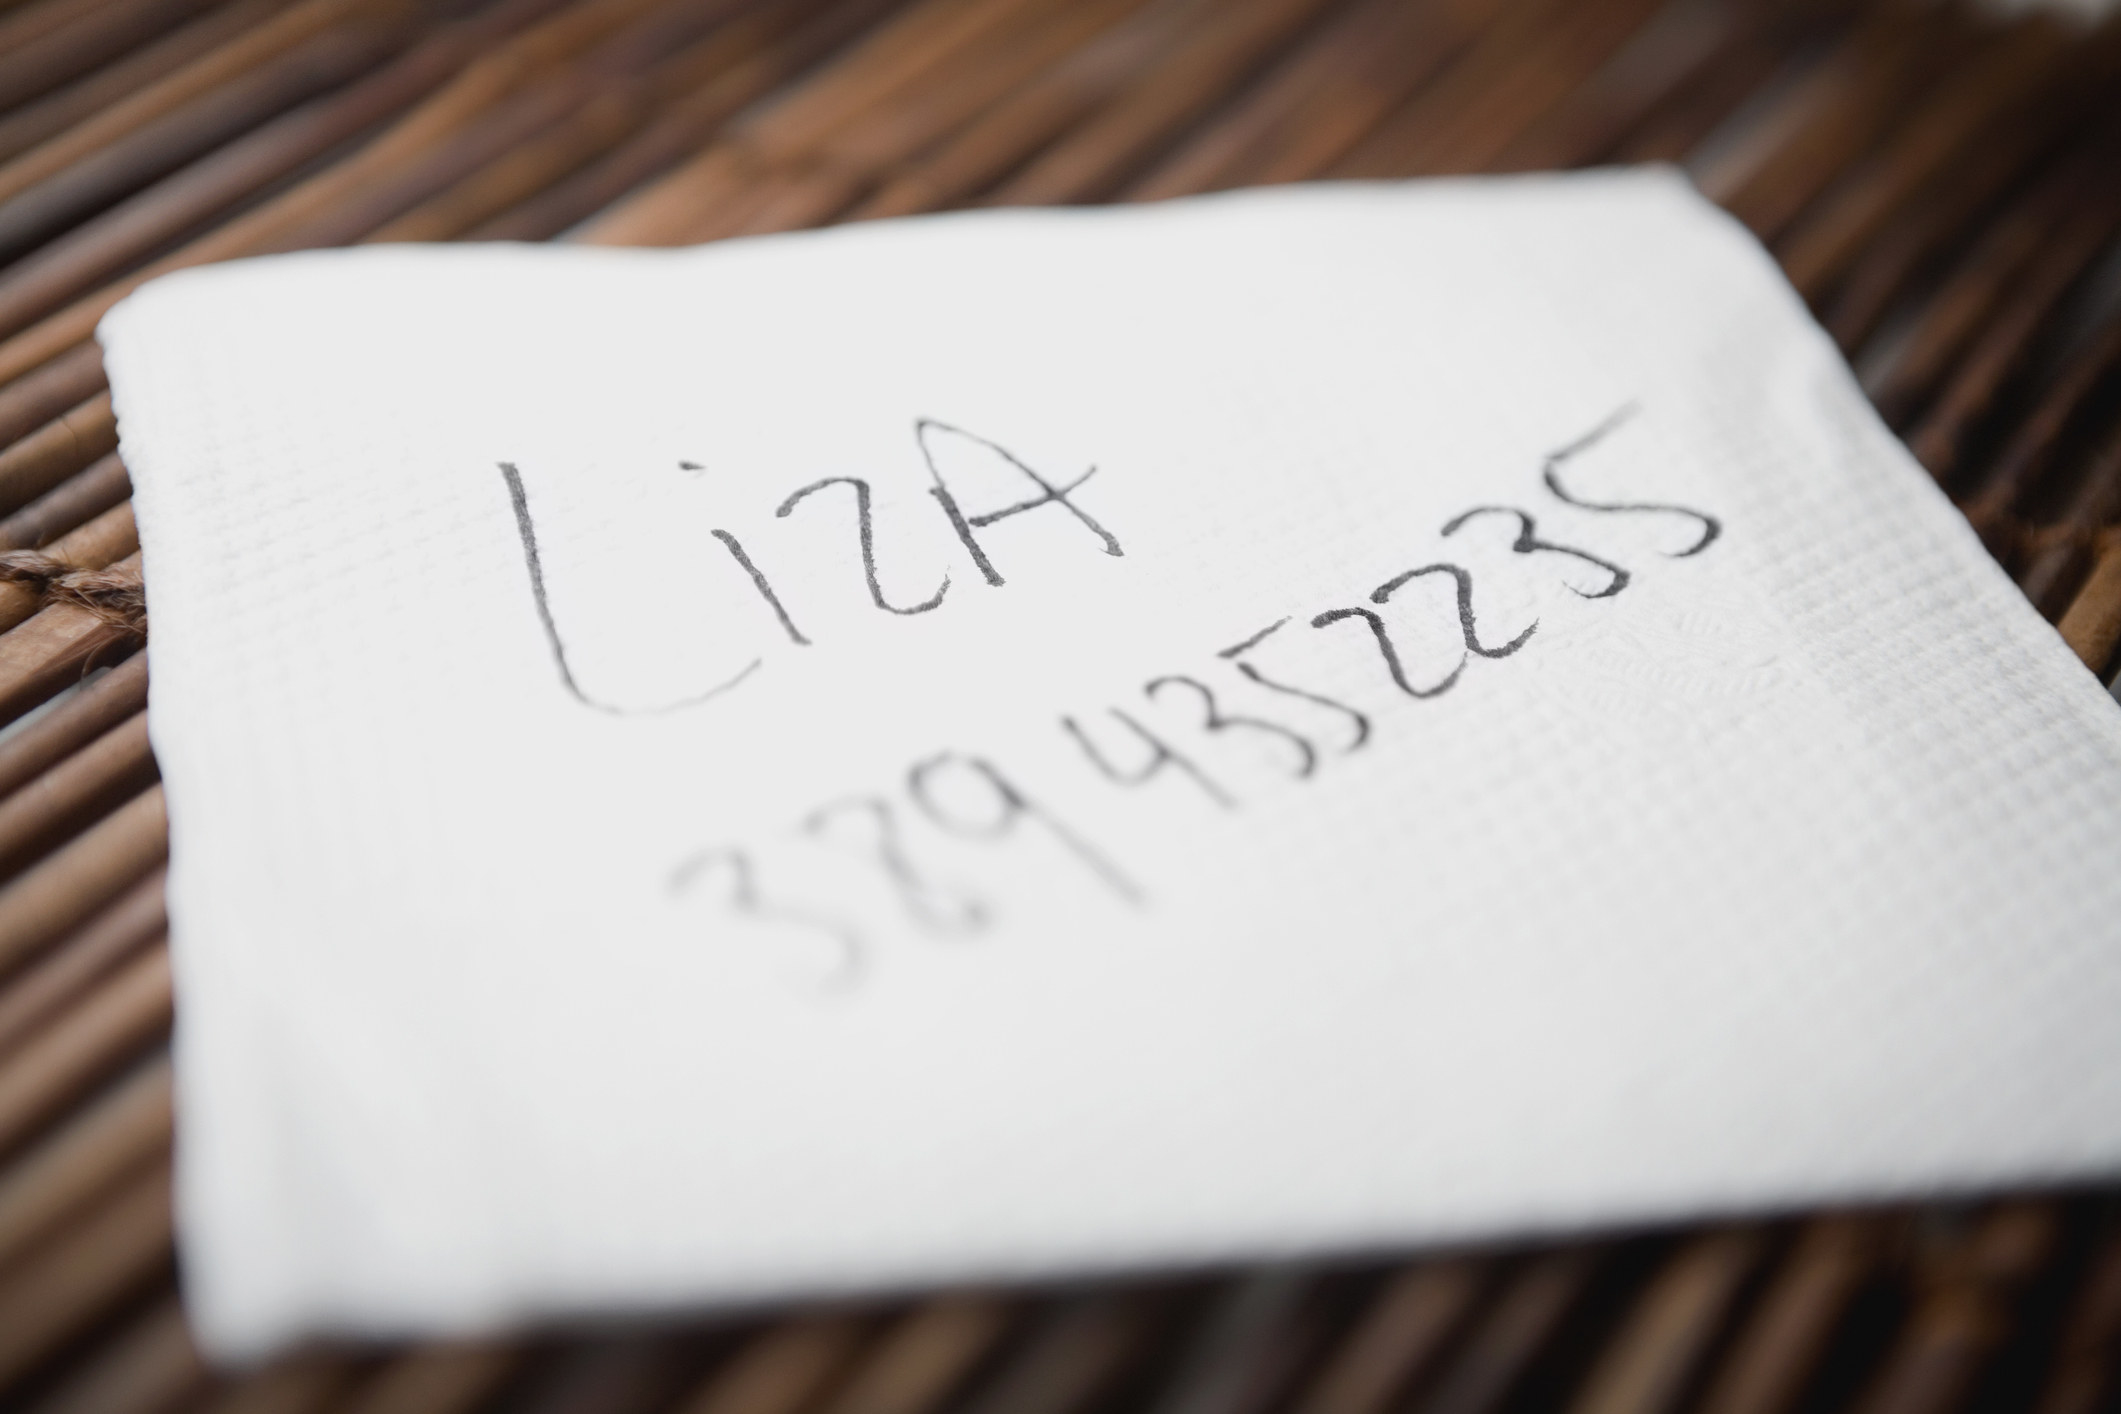 number and name written on a napkin